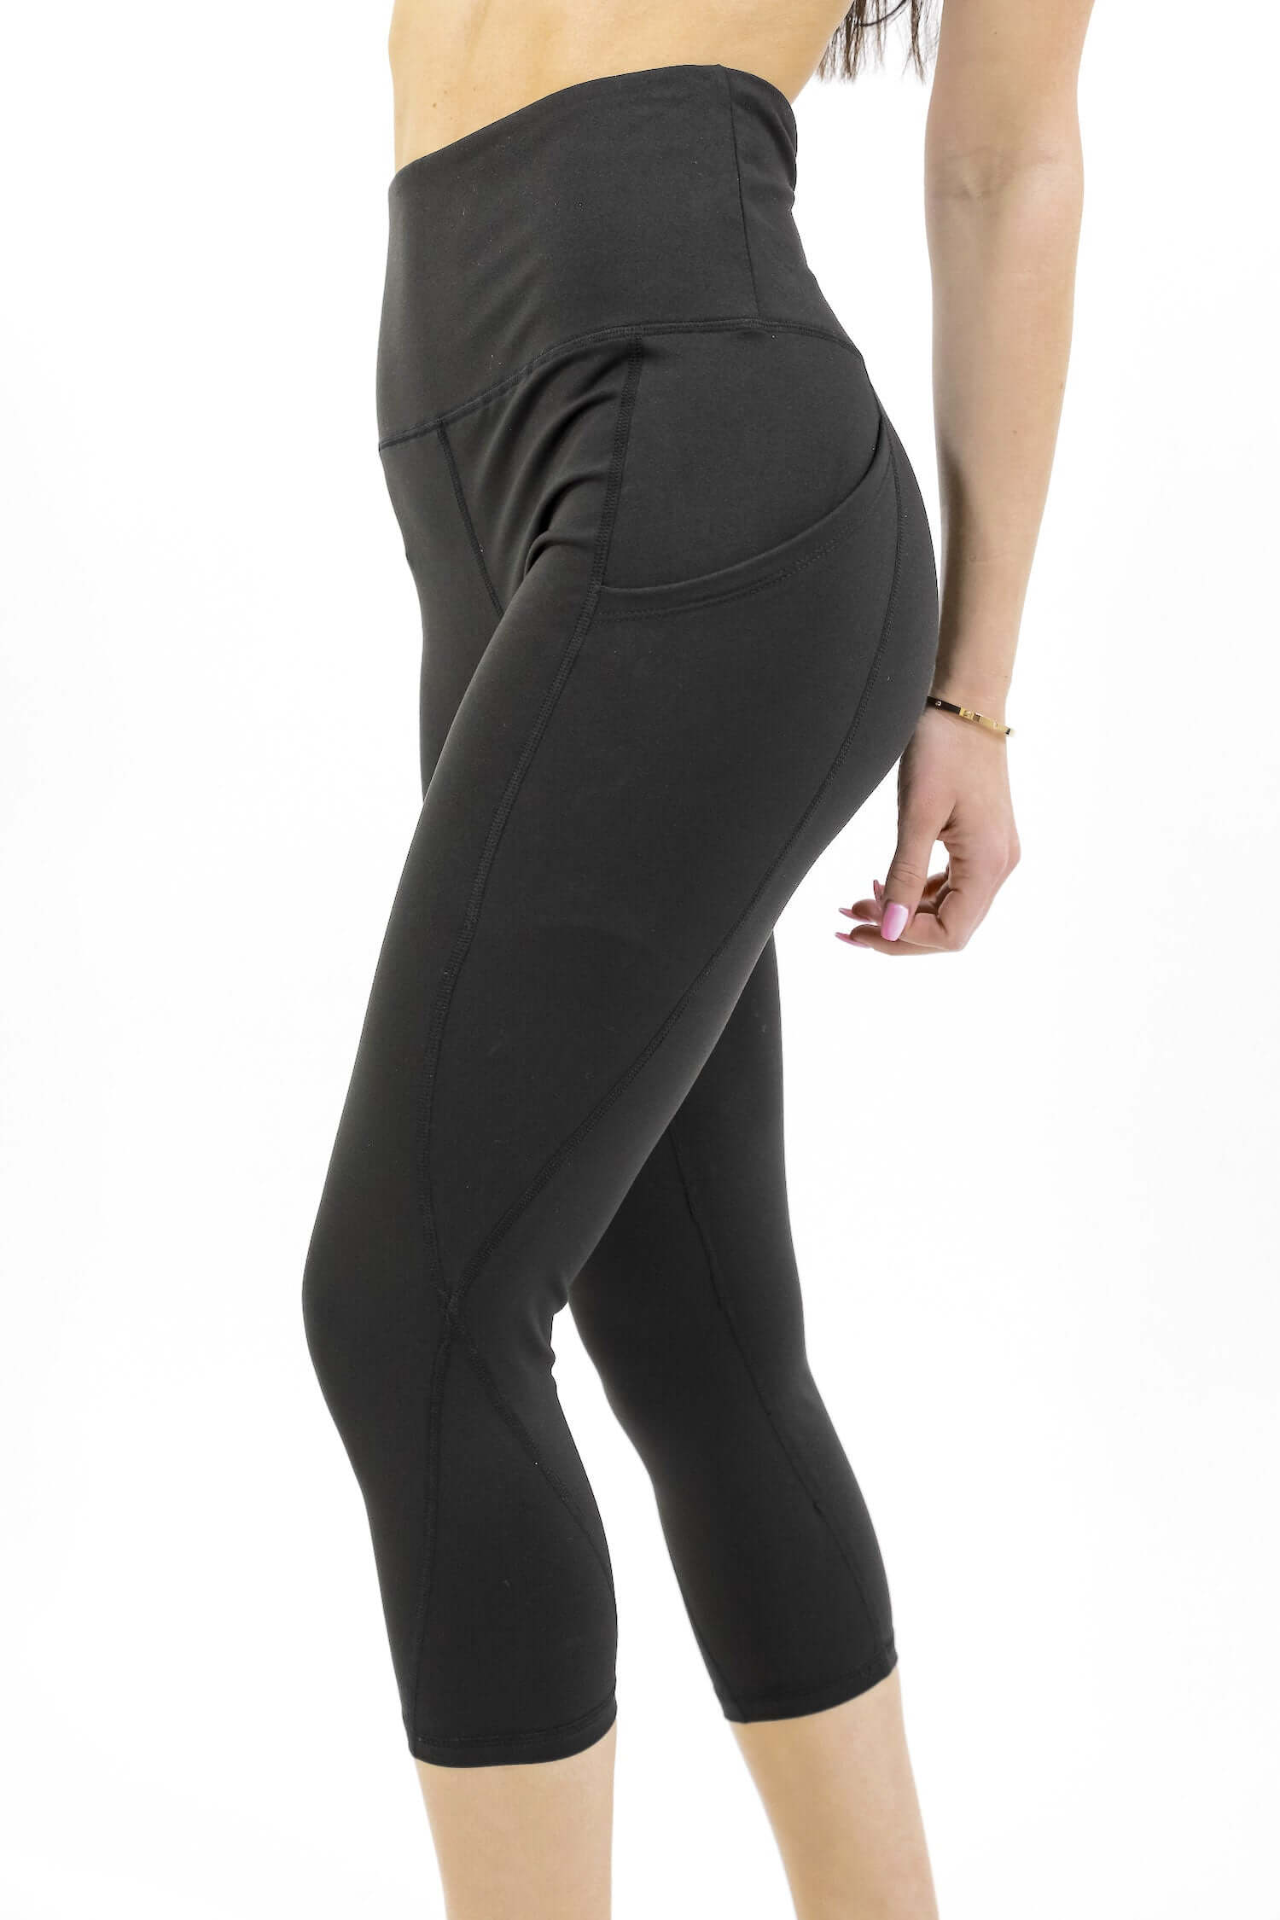 Seajoy Athletic High-Waisted Capri Leggings with Hip Pockets - Comfortable and Stylish Activewear for Women